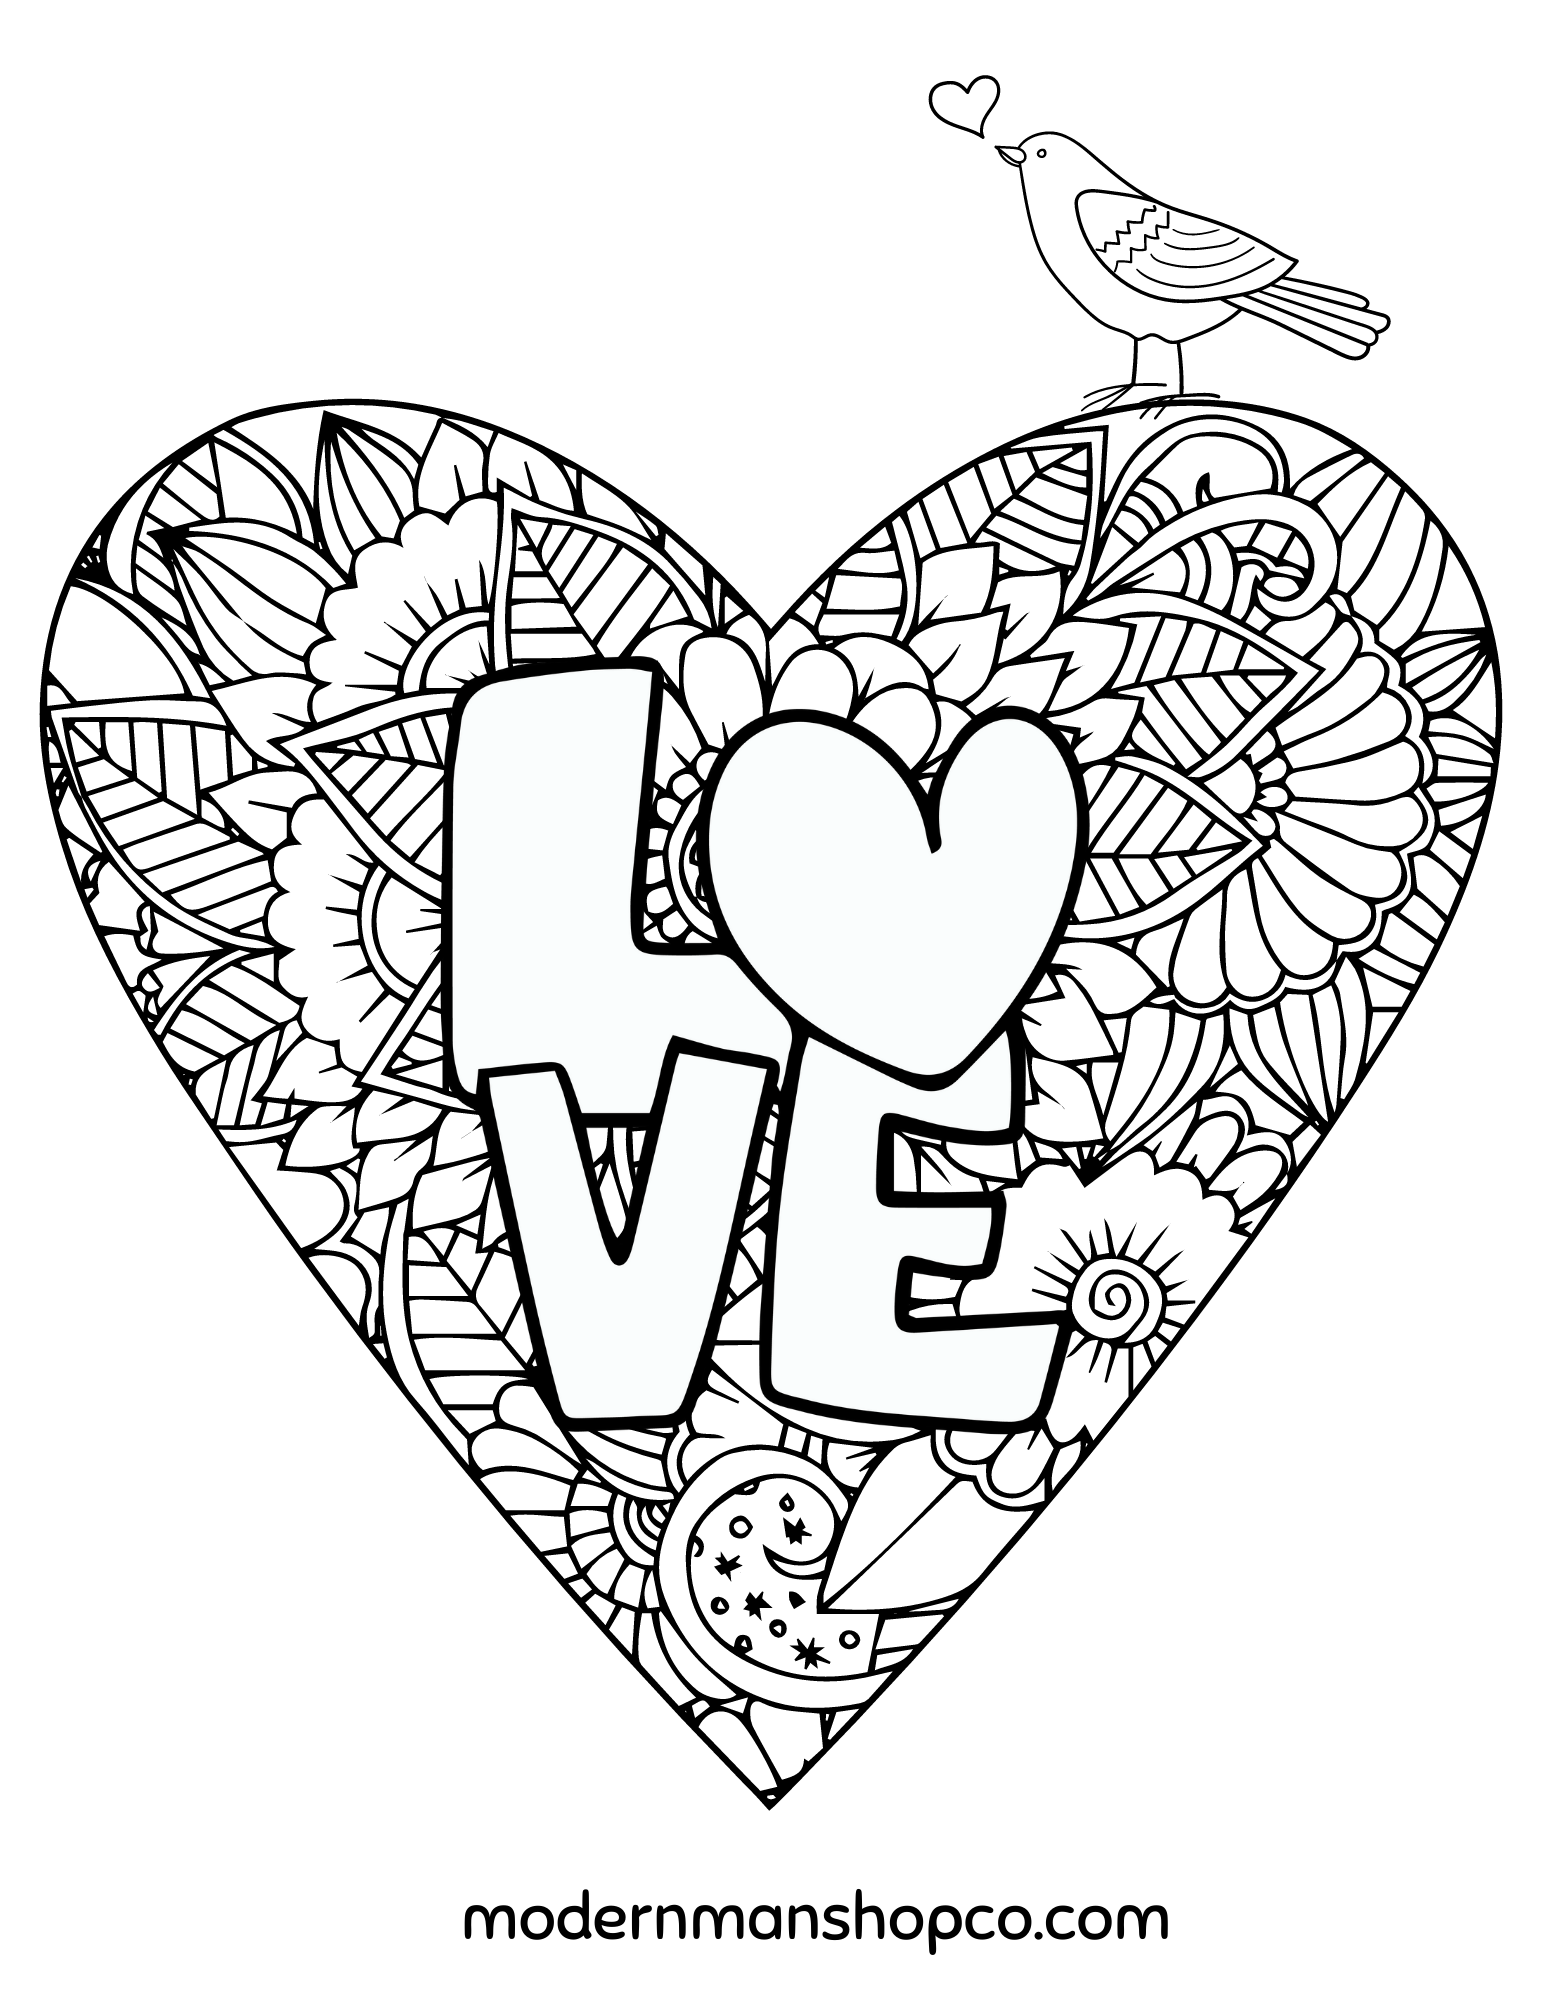 Celebrate Love with Our Free Valentine's Day Coloring Pages!(14)